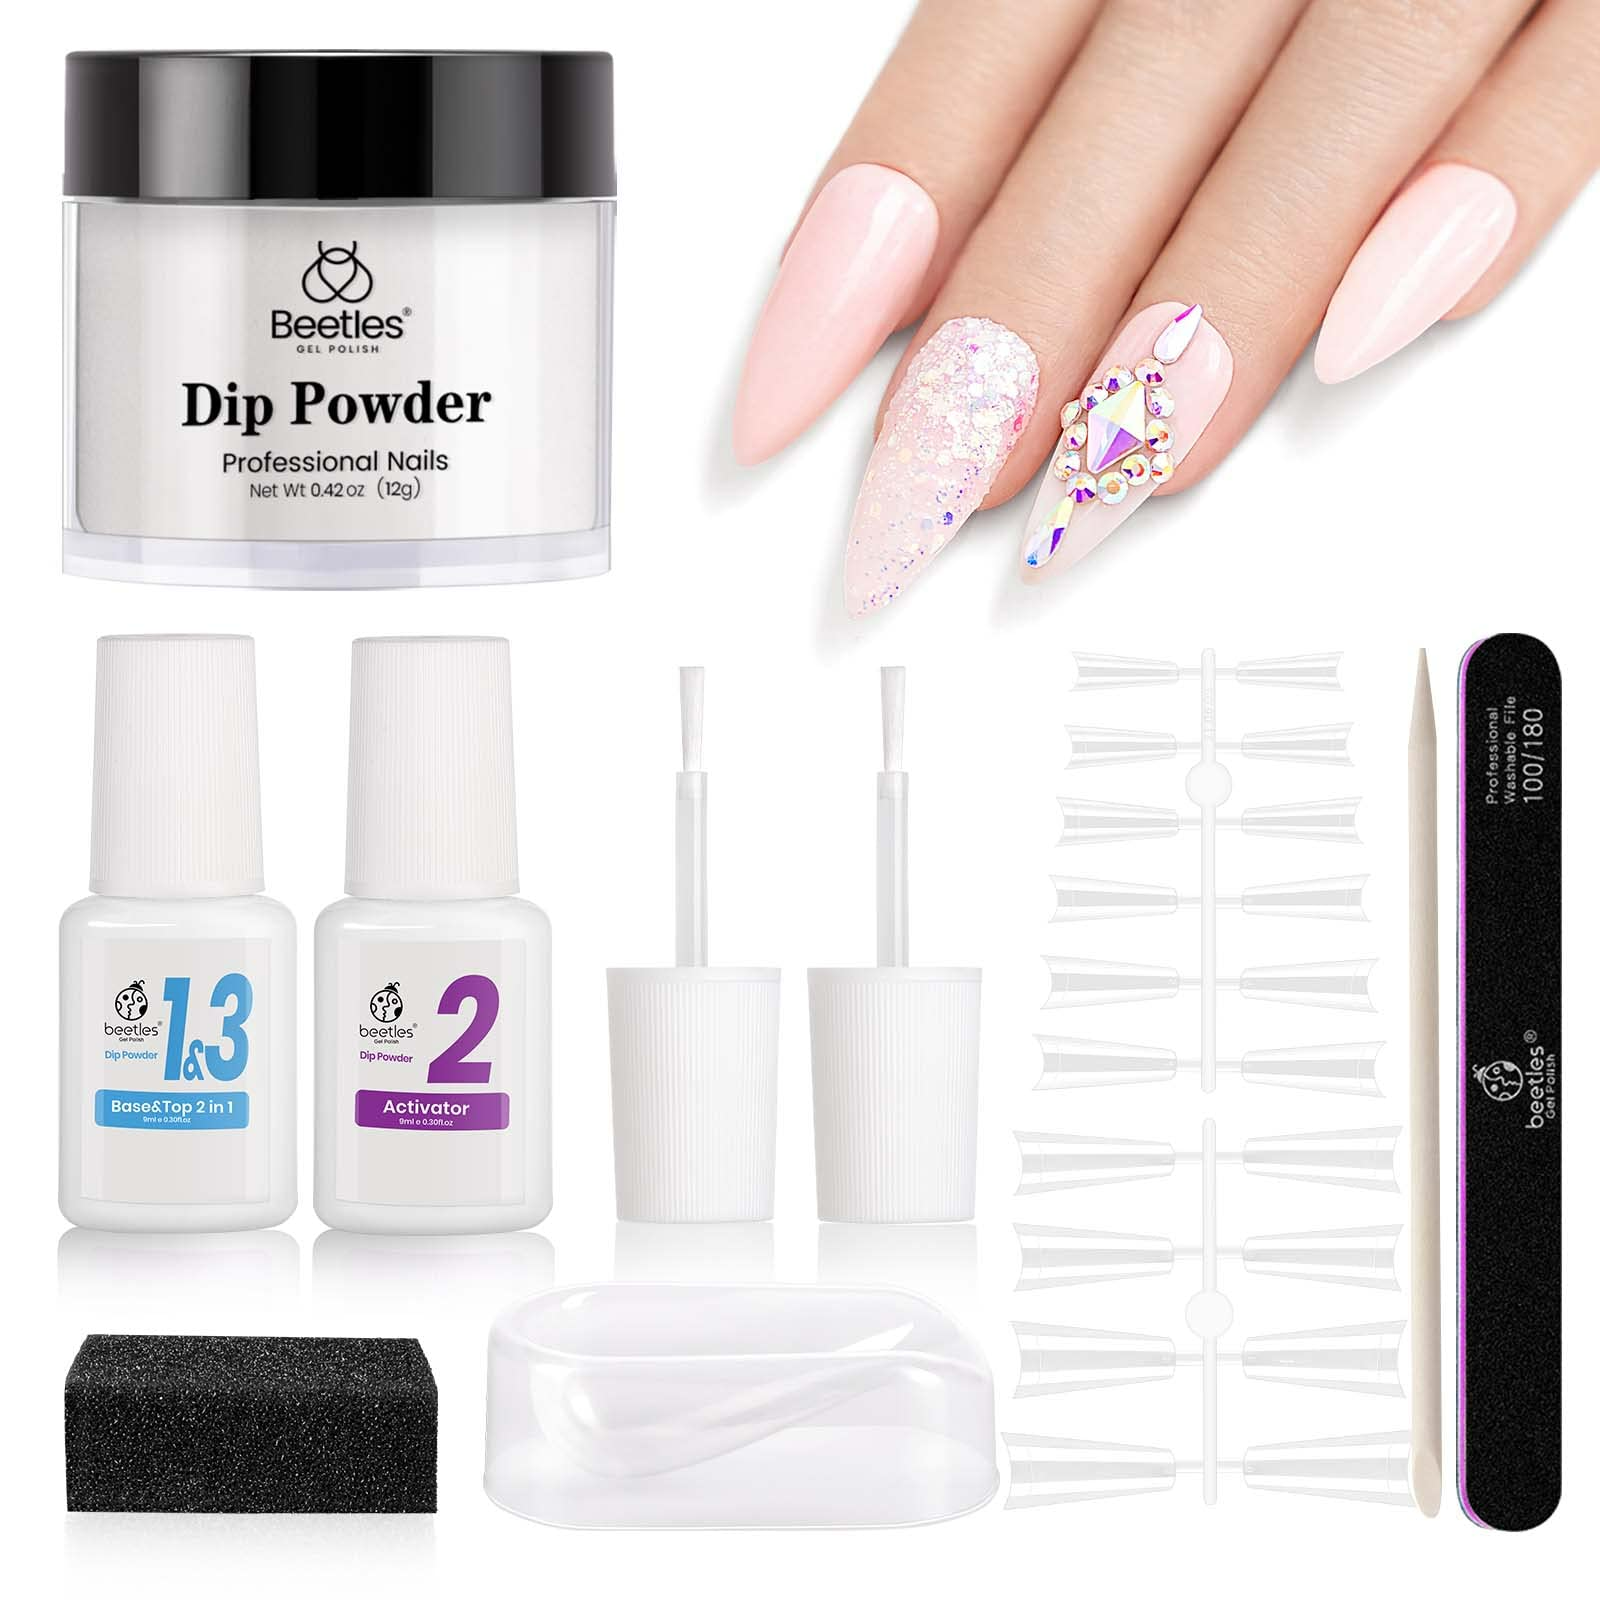 Dip Powder V. Acrylic Nails: What's The Difference?